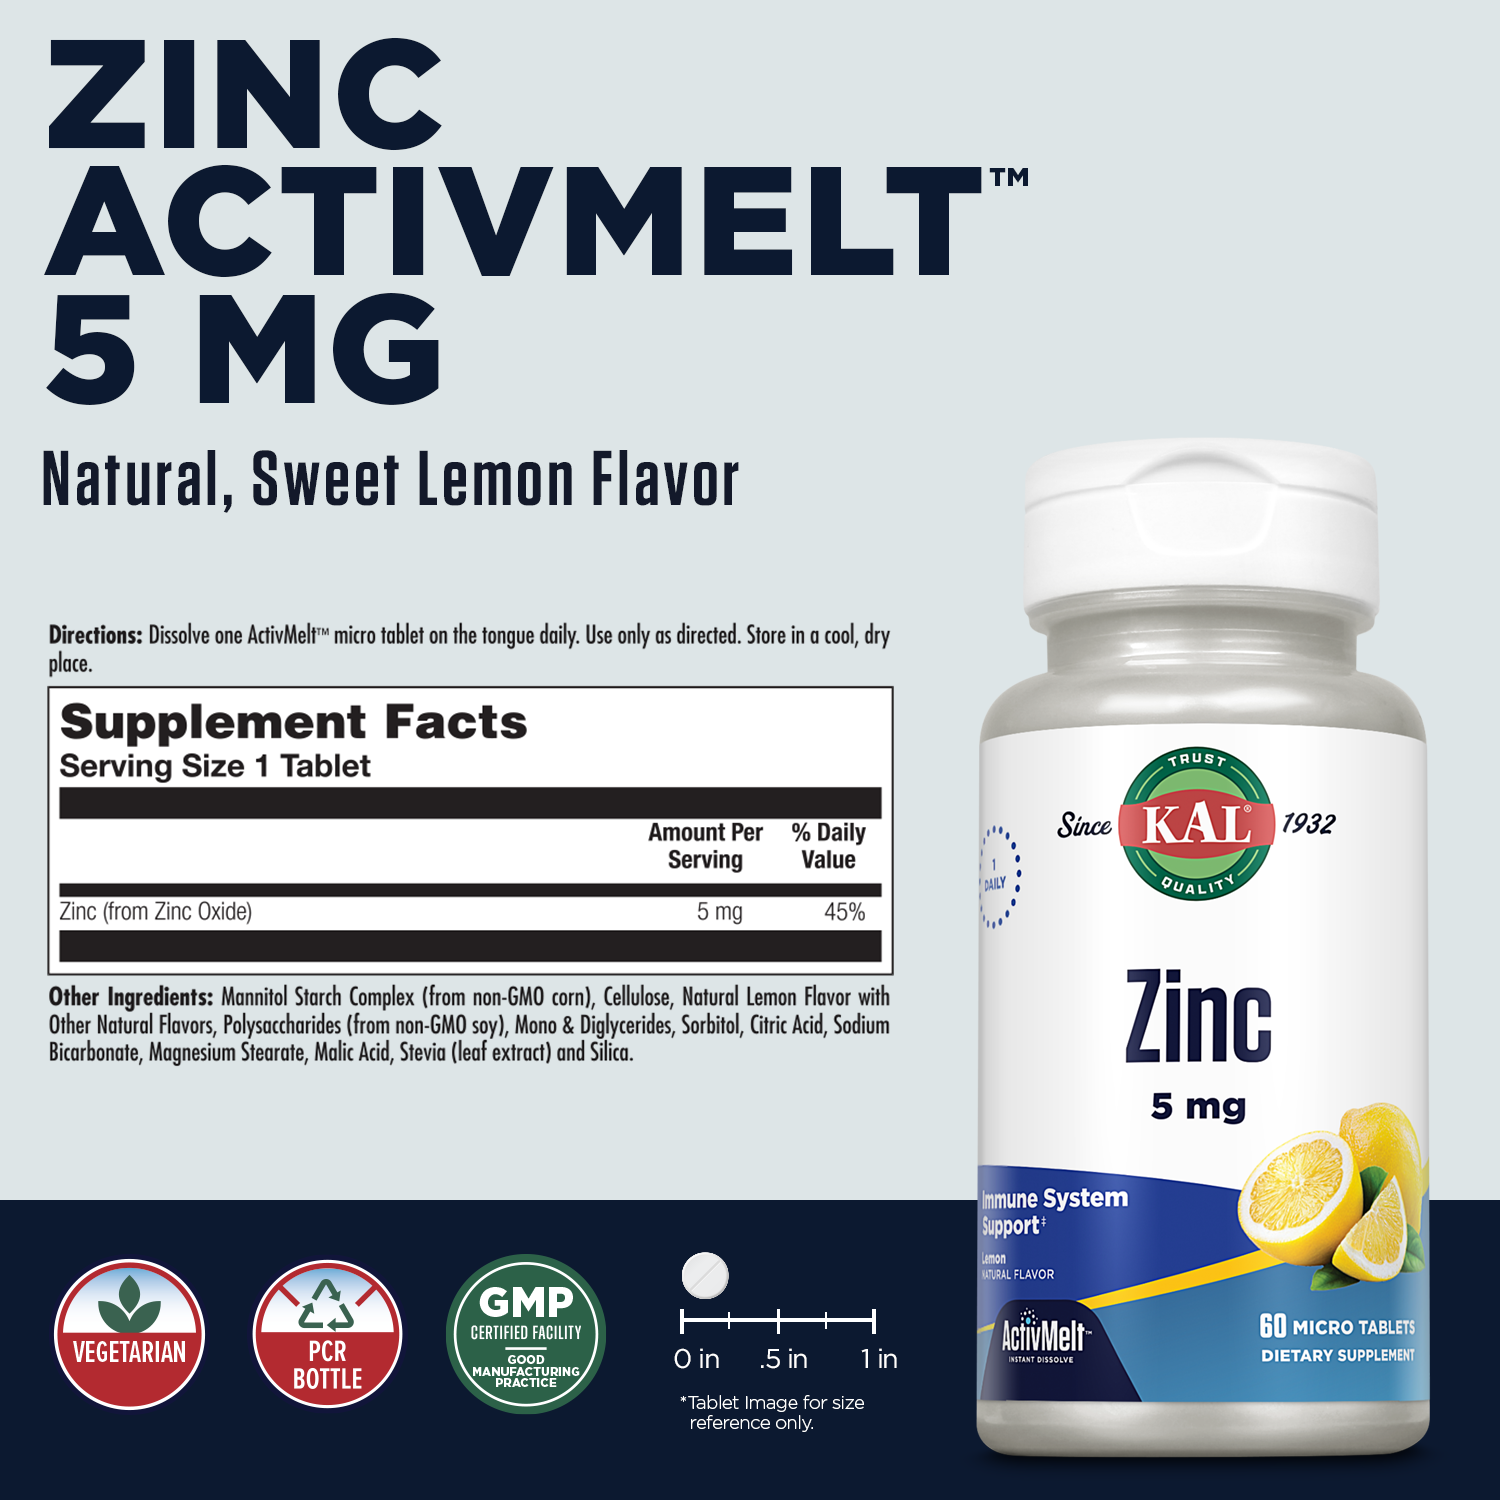 KAL Zinc 5 mg ActivMelt | Sweet Lemon Flavor | Healthy Protein Synthesis, Growth, Taste Acuity & Immune System Function Support | 60 Micro Tablets - image 2 of 6